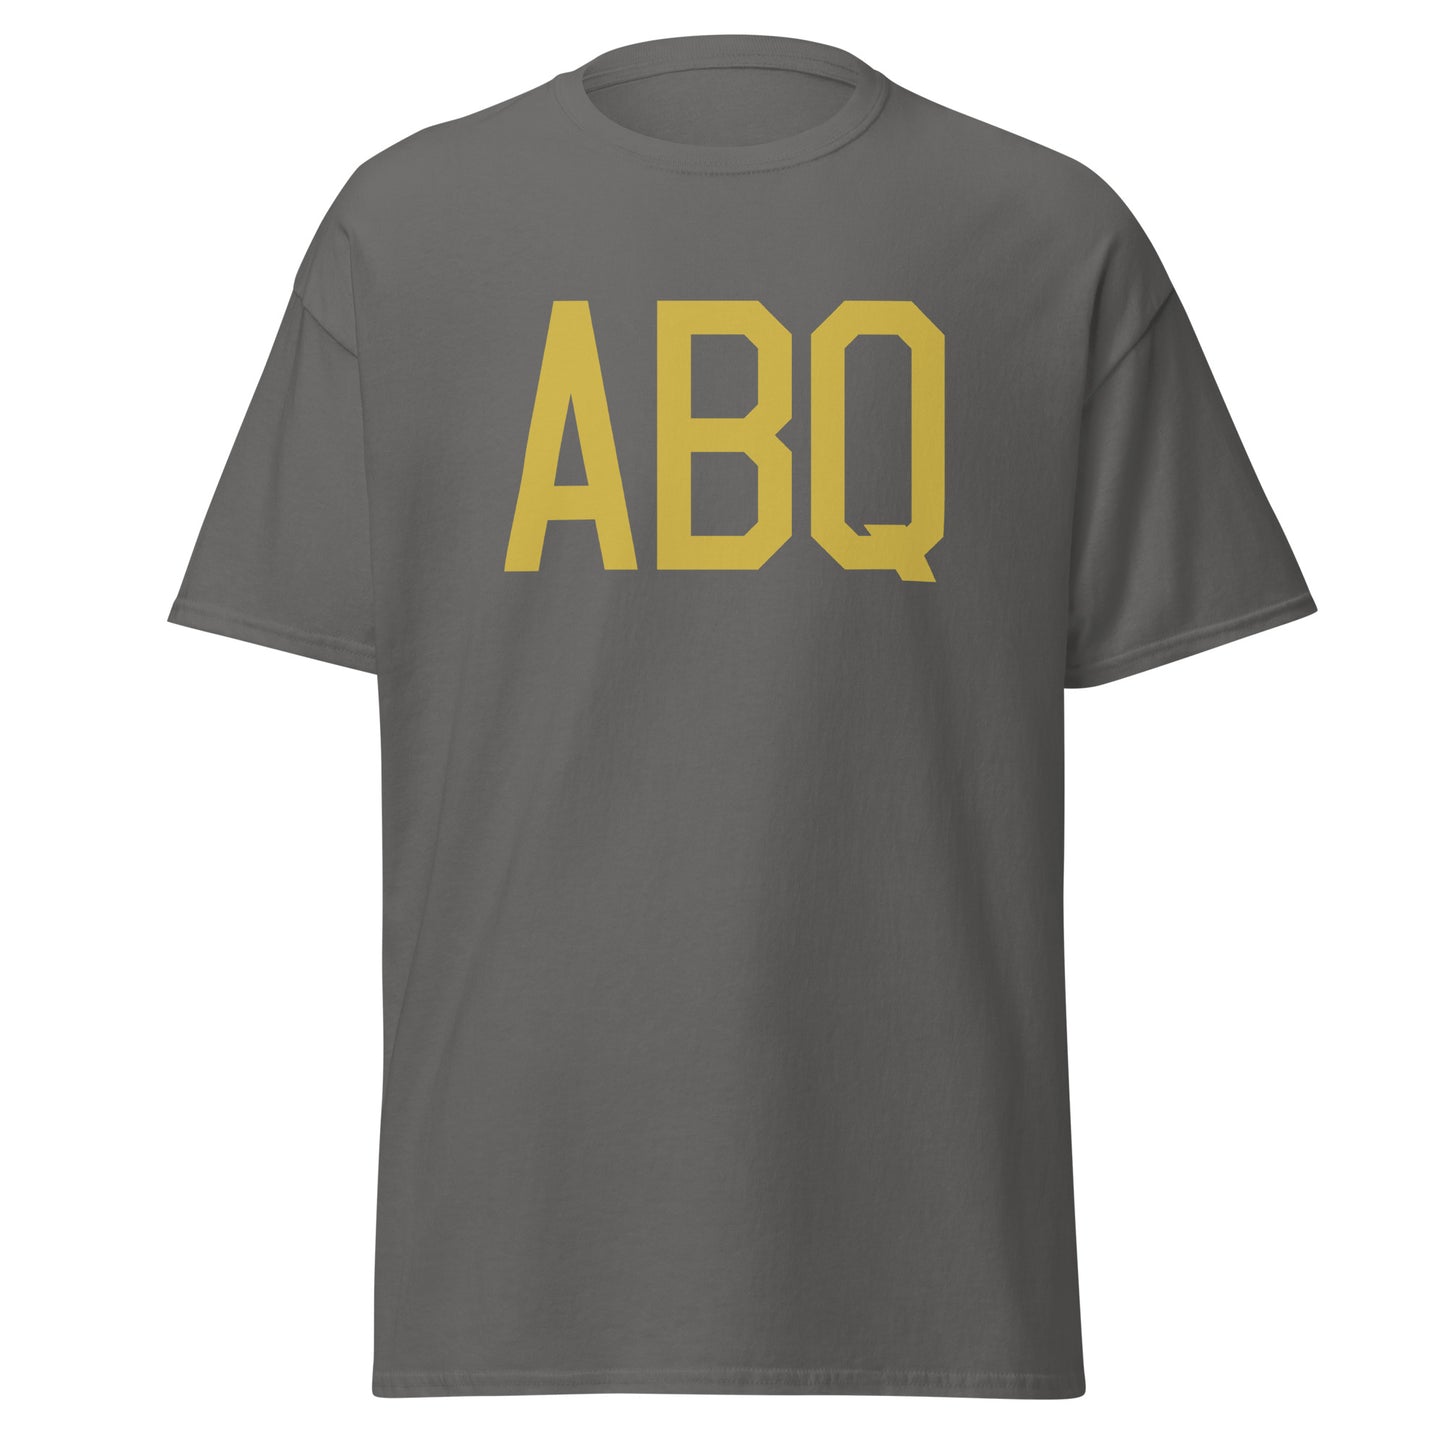 Aviation Enthusiast Men's Tee - Old Gold Graphic • ABQ Albuquerque • YHM Designs - Image 05